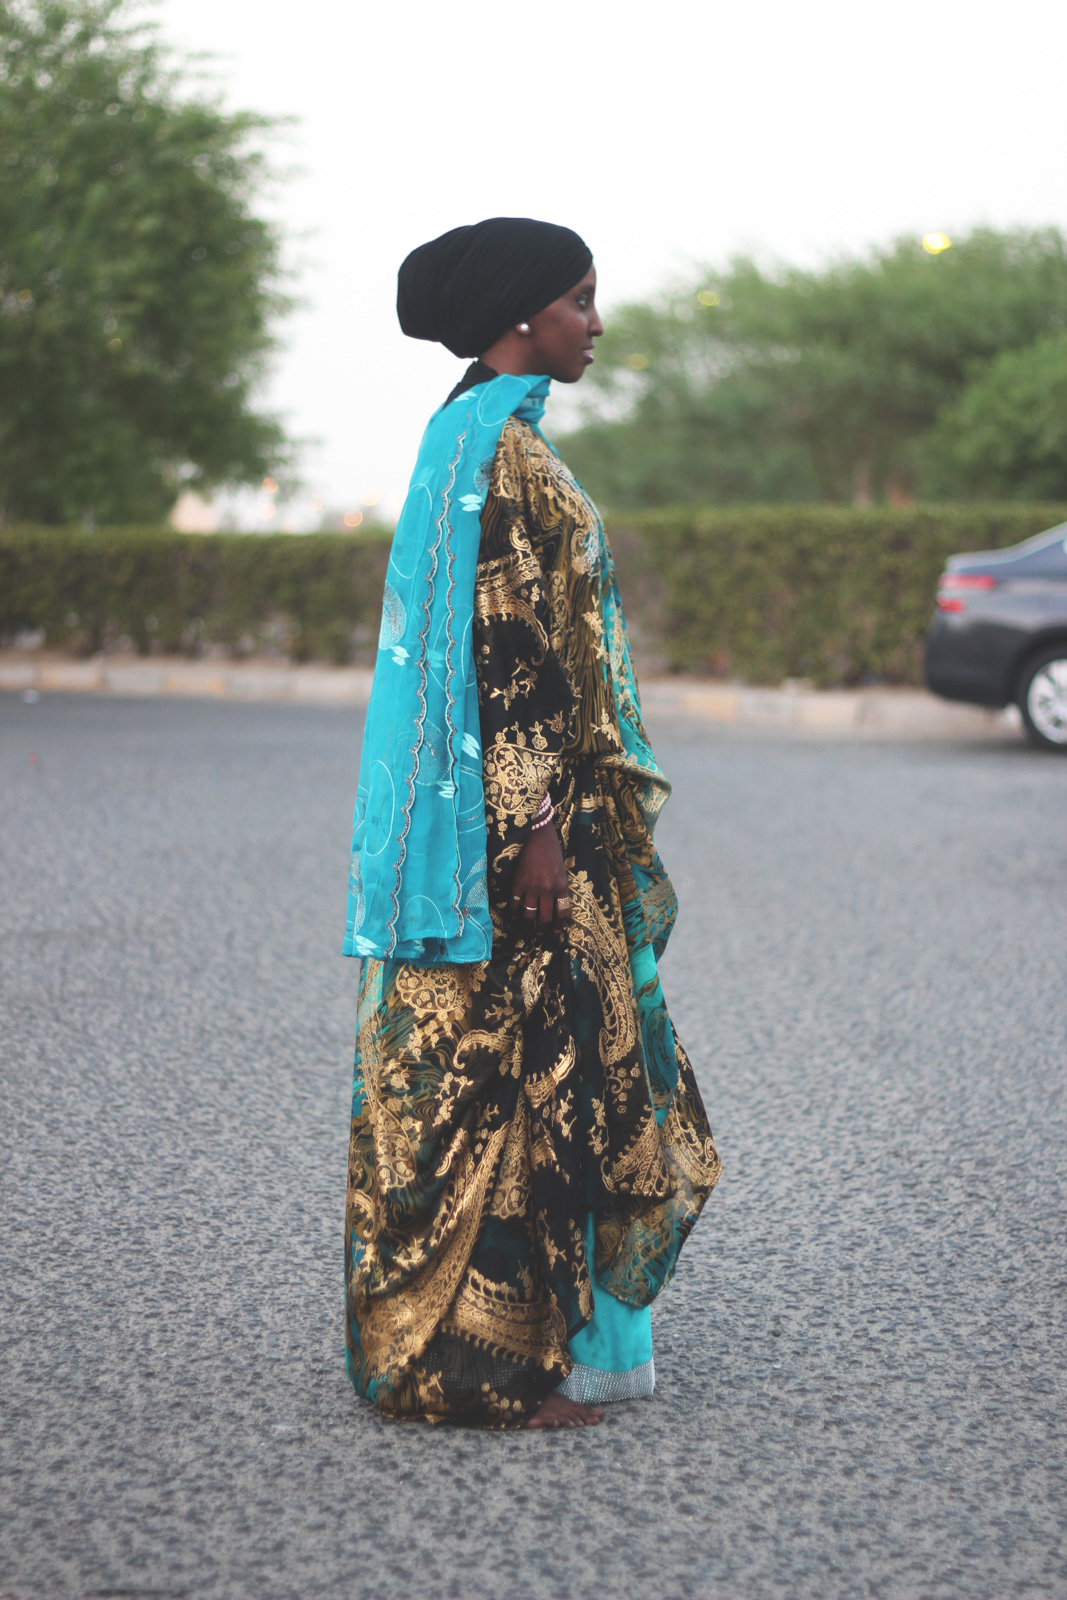 Sohair Al-Baroud, photographed in Kuwait City in 2014 by Mohamed Mohamud for his Somali Sideways project